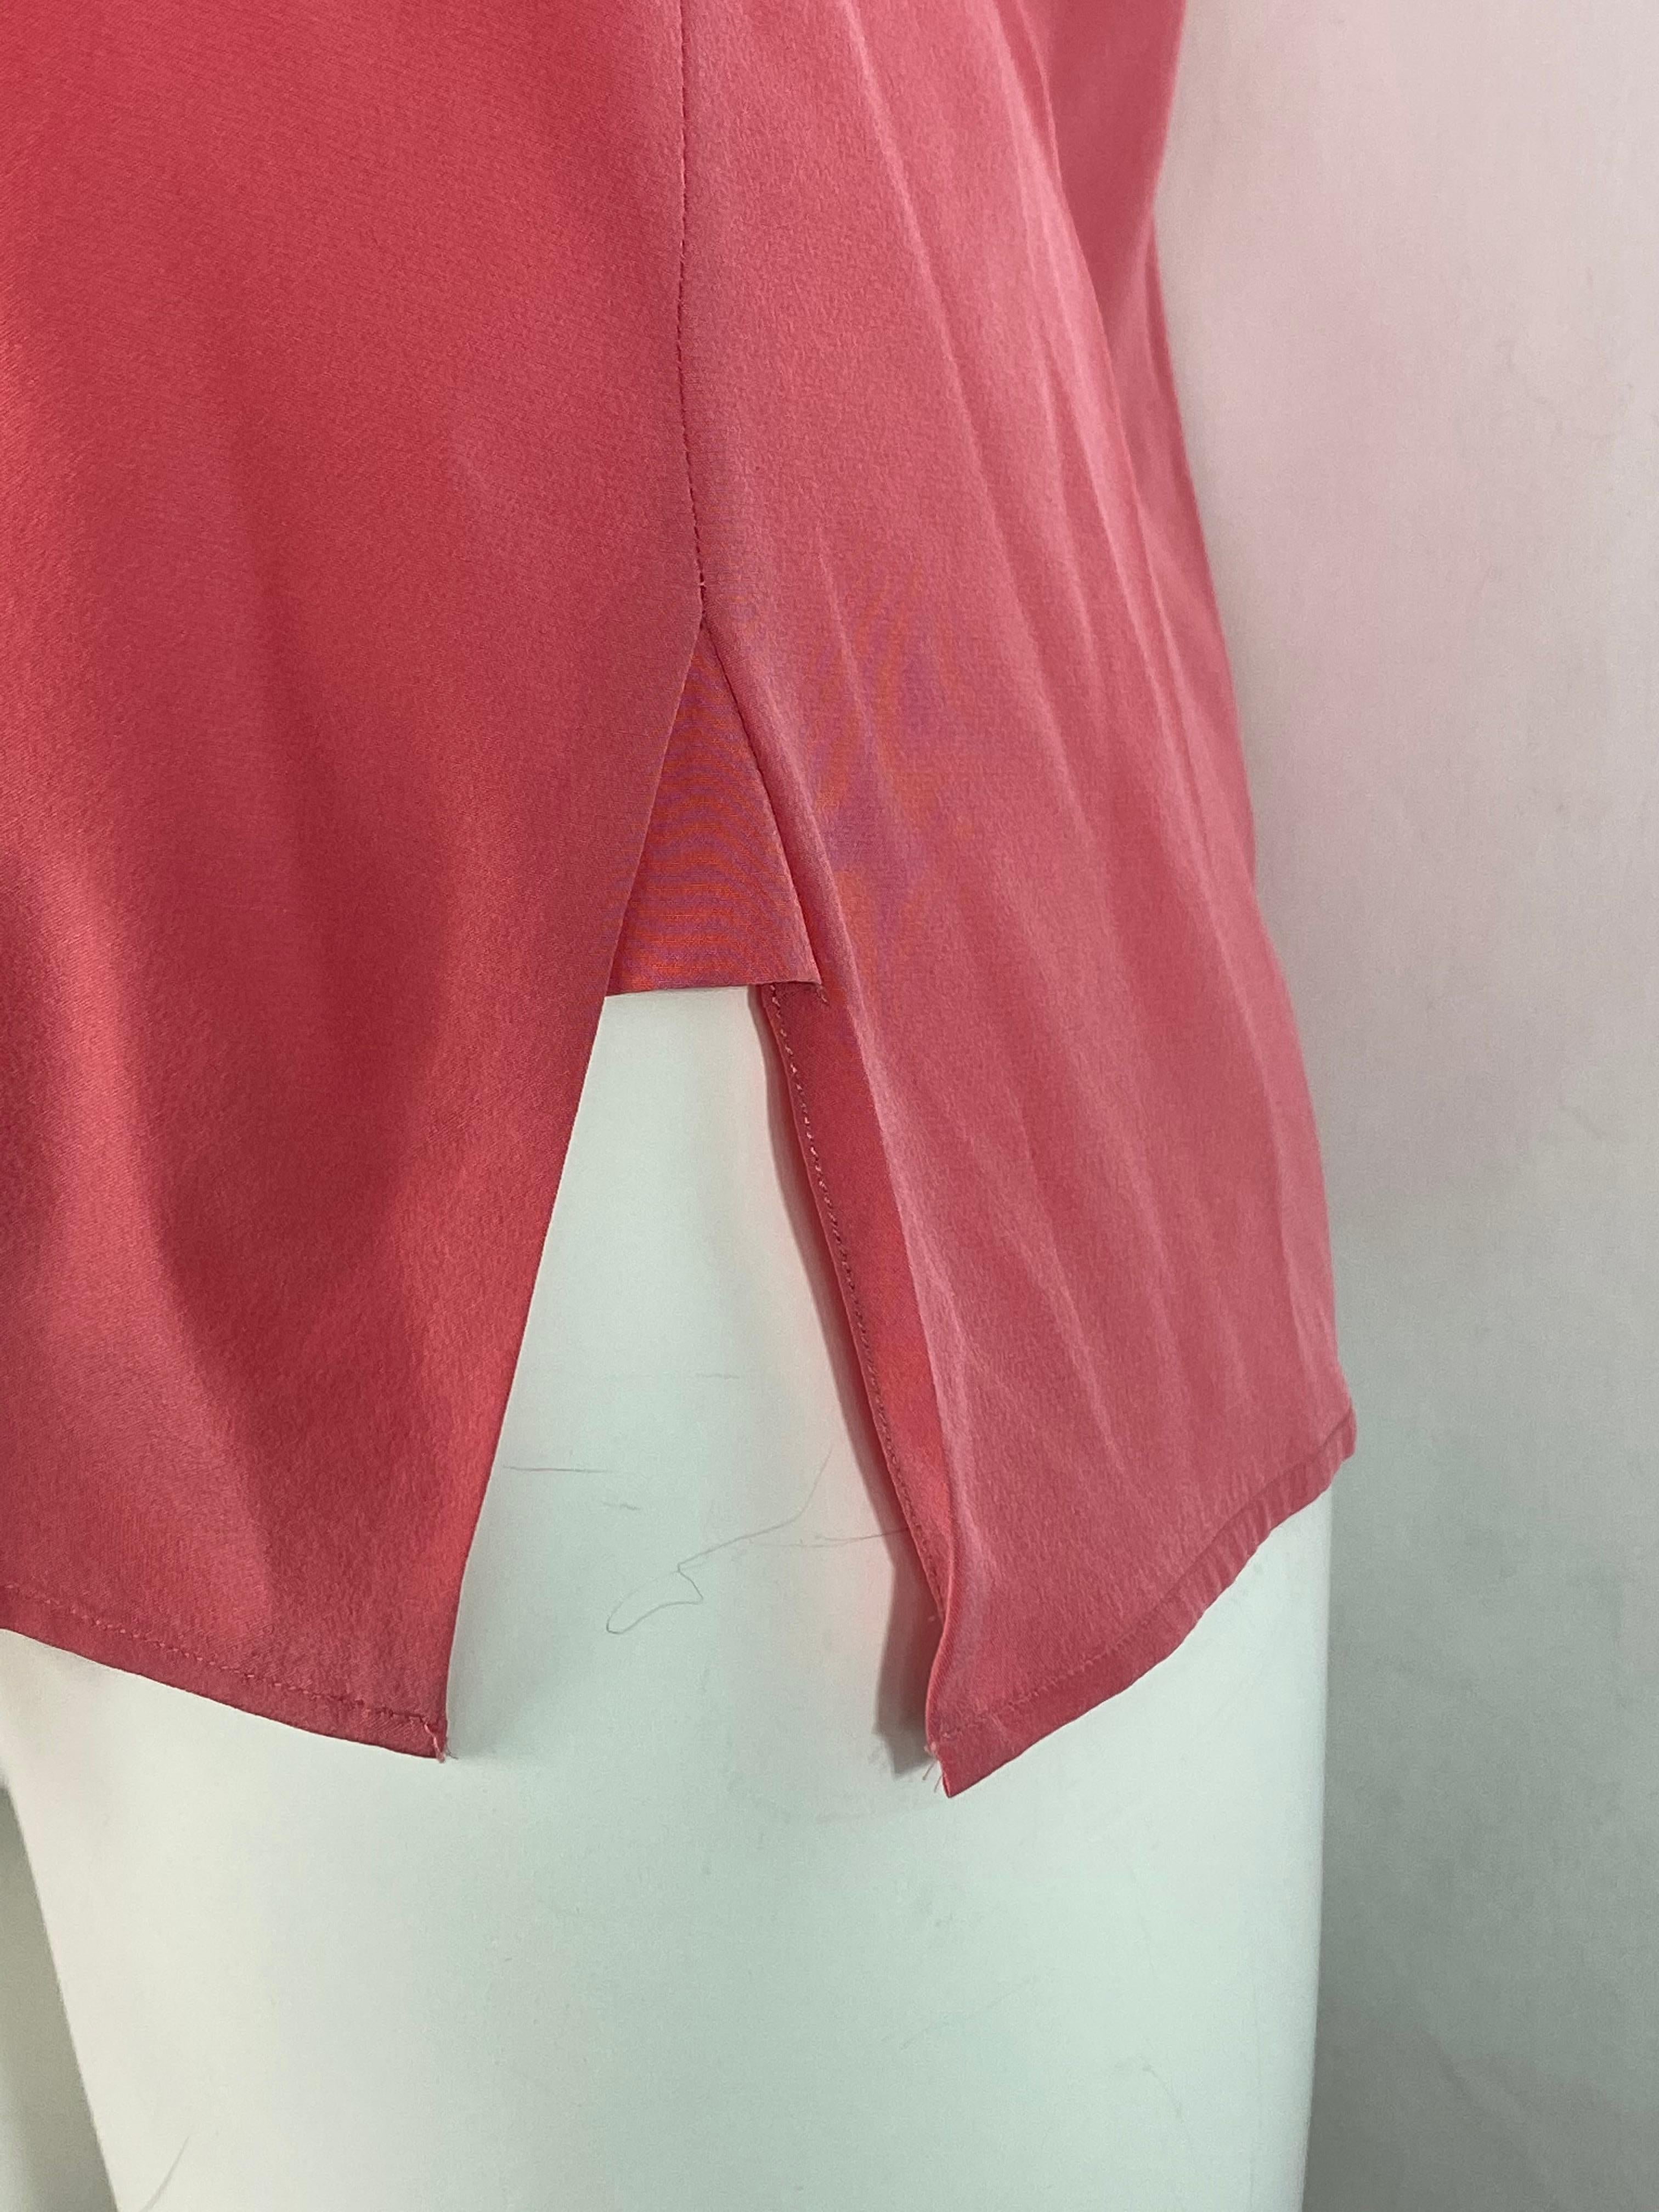 Balenciaga Paris Pink Coral Silk Short Sleeves Blouse Top Size 40 In Excellent Condition For Sale In Beverly Hills, CA